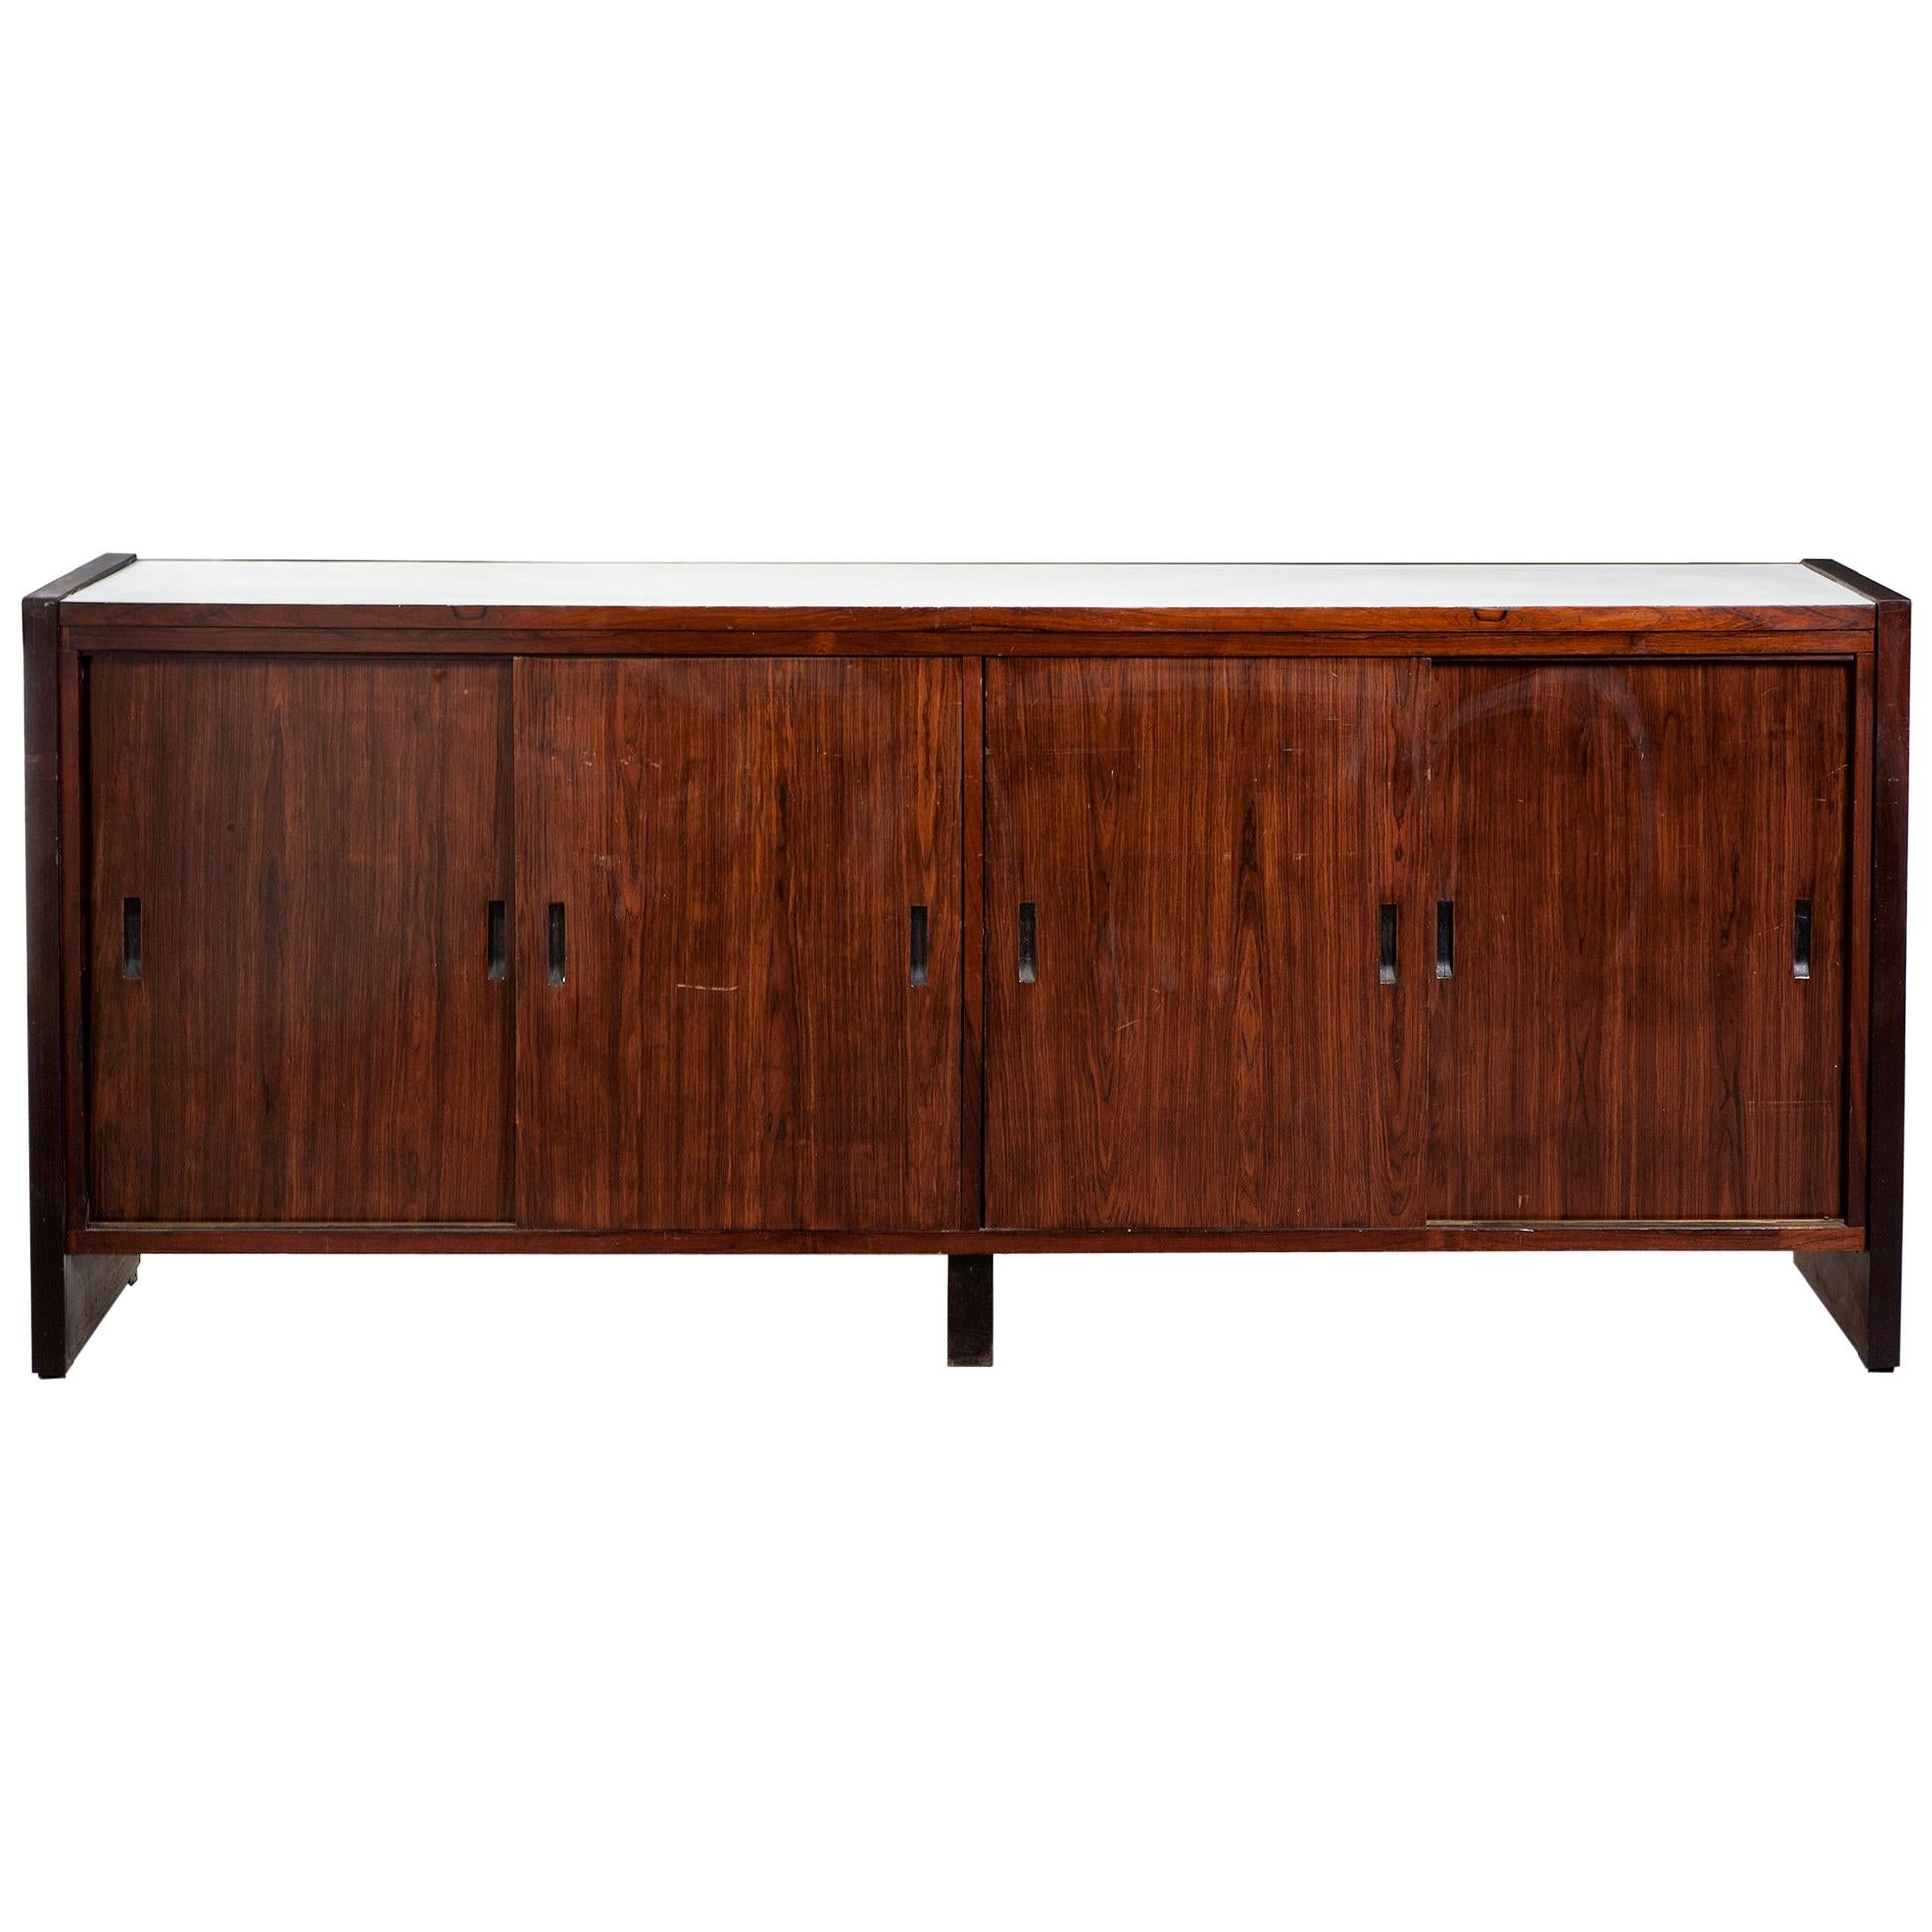 Four-Door Credenza in Rosewood with White Formica Top and Sides, 1960s